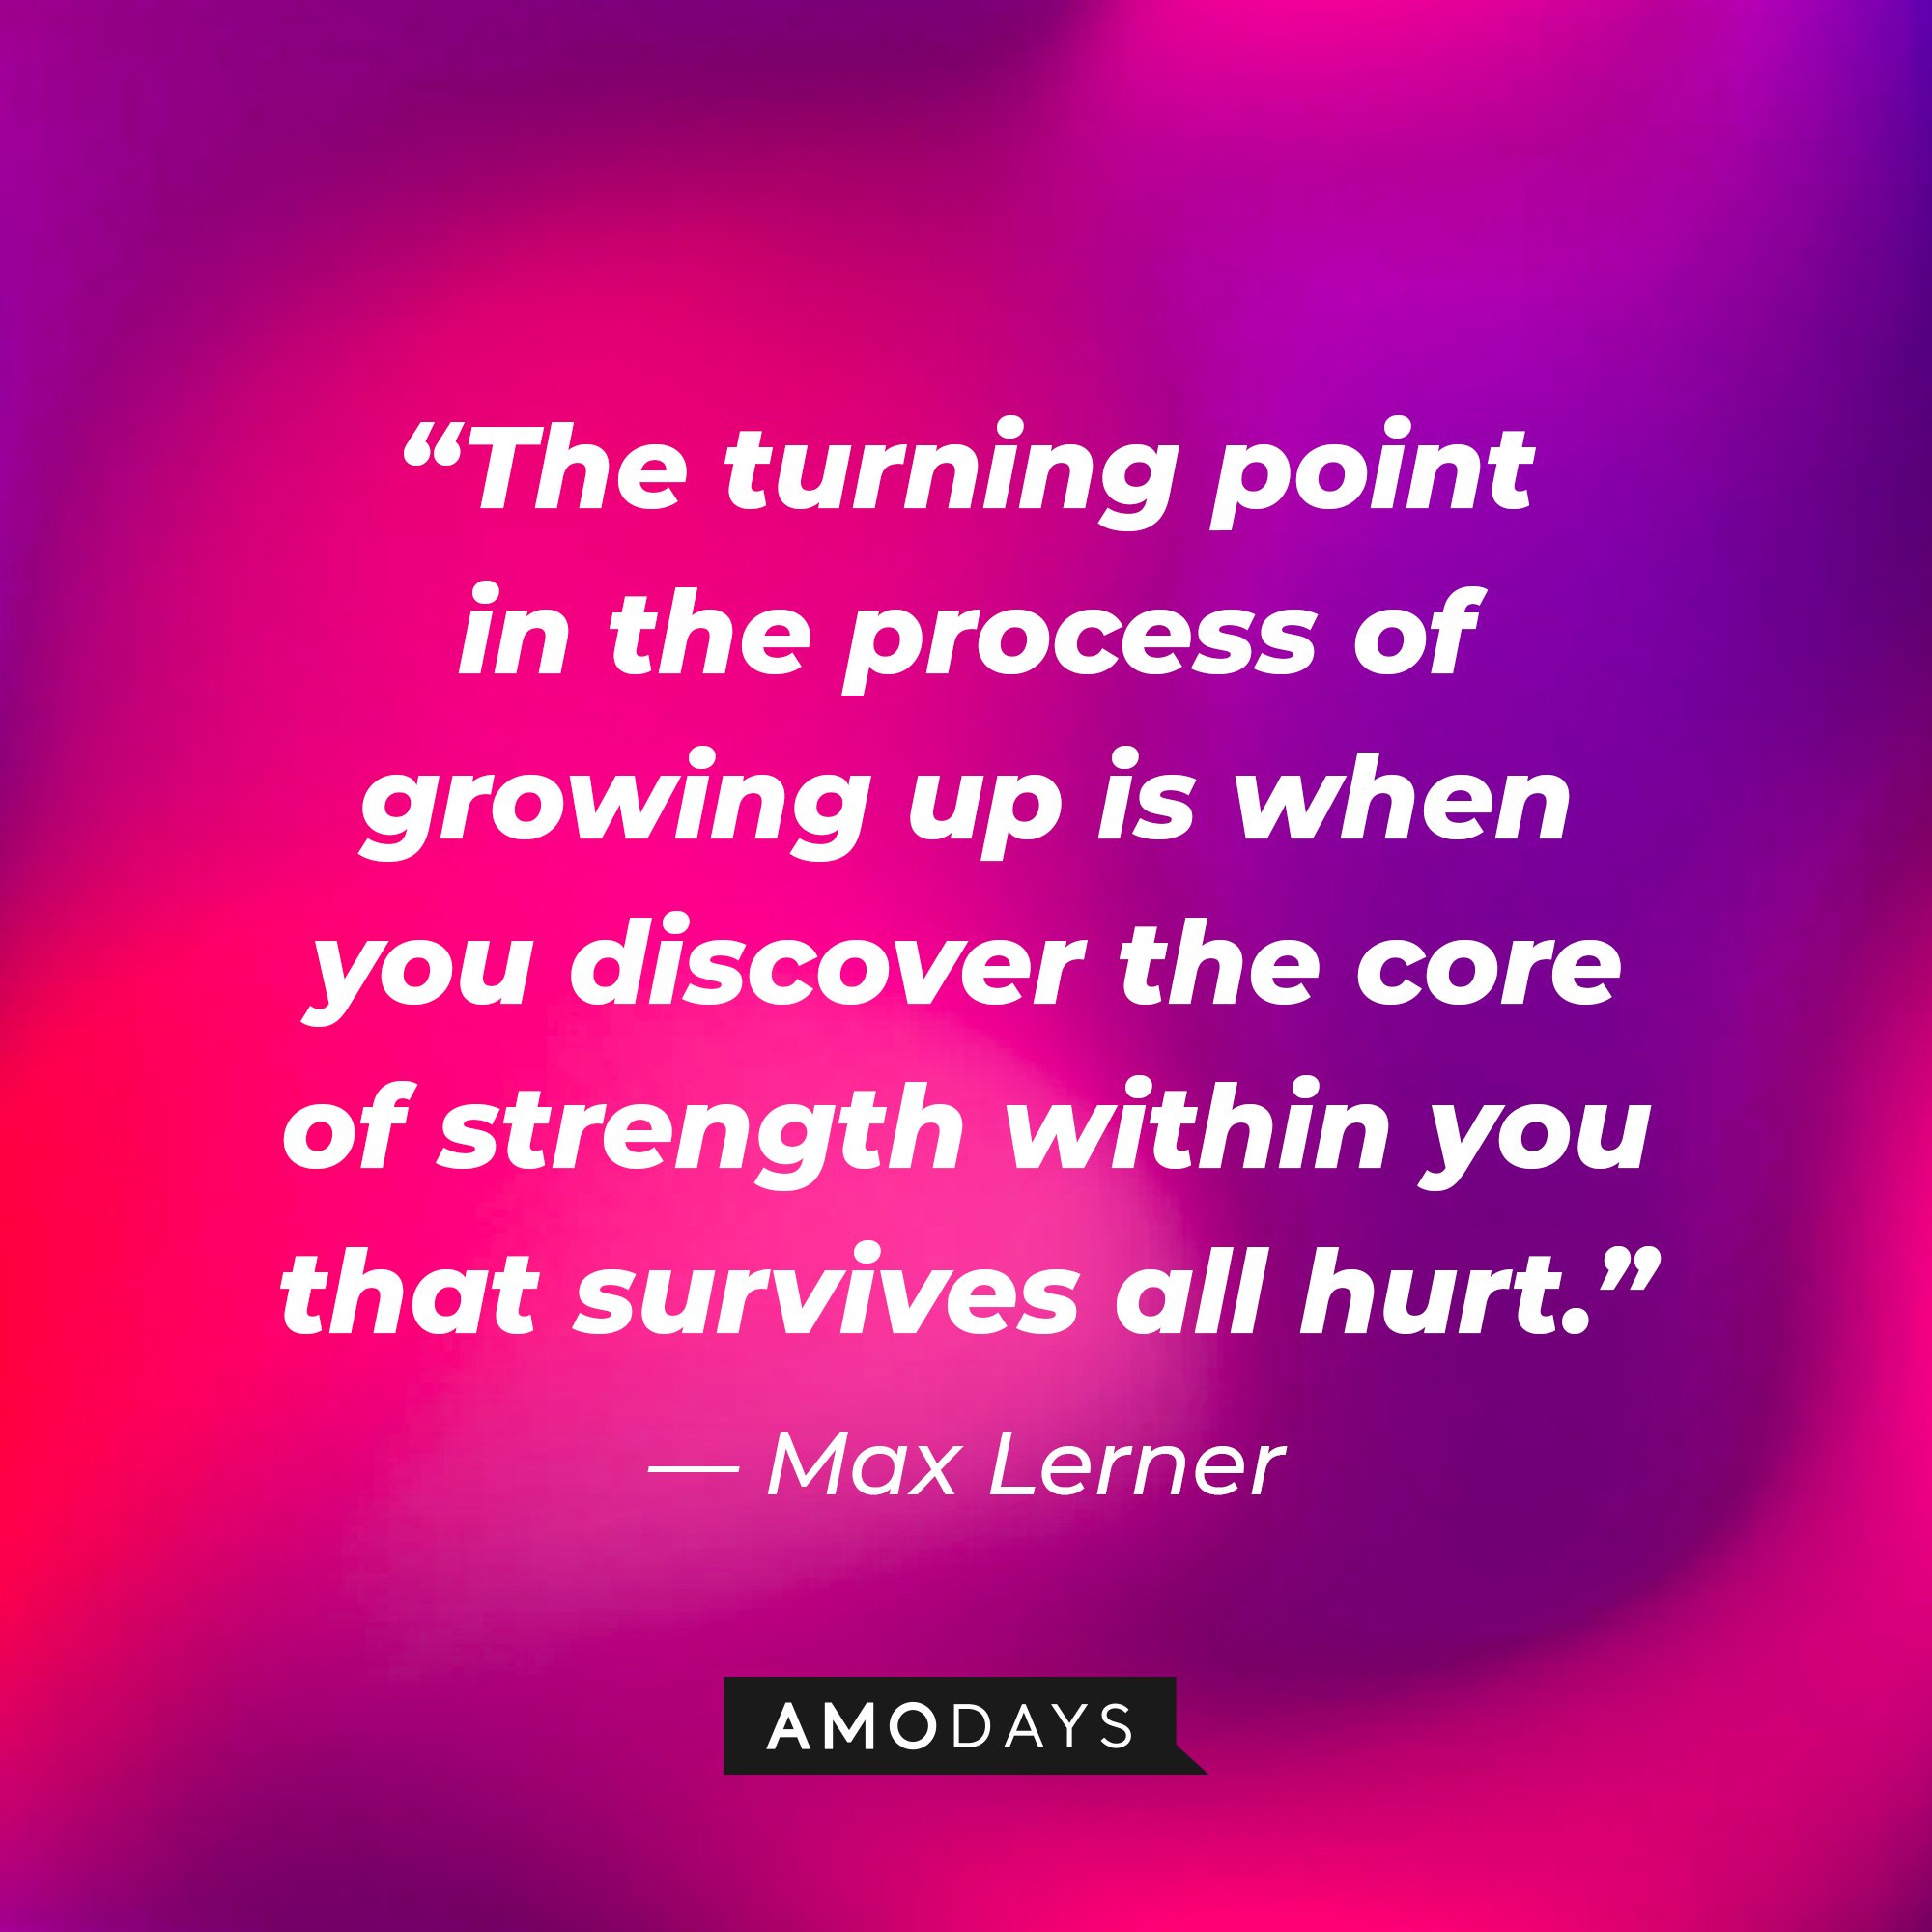 Max Lerner's quote: “The turning point in the process of growing up is when you discover the core of strength within you that survives all hurt.” | Image: AmoDays